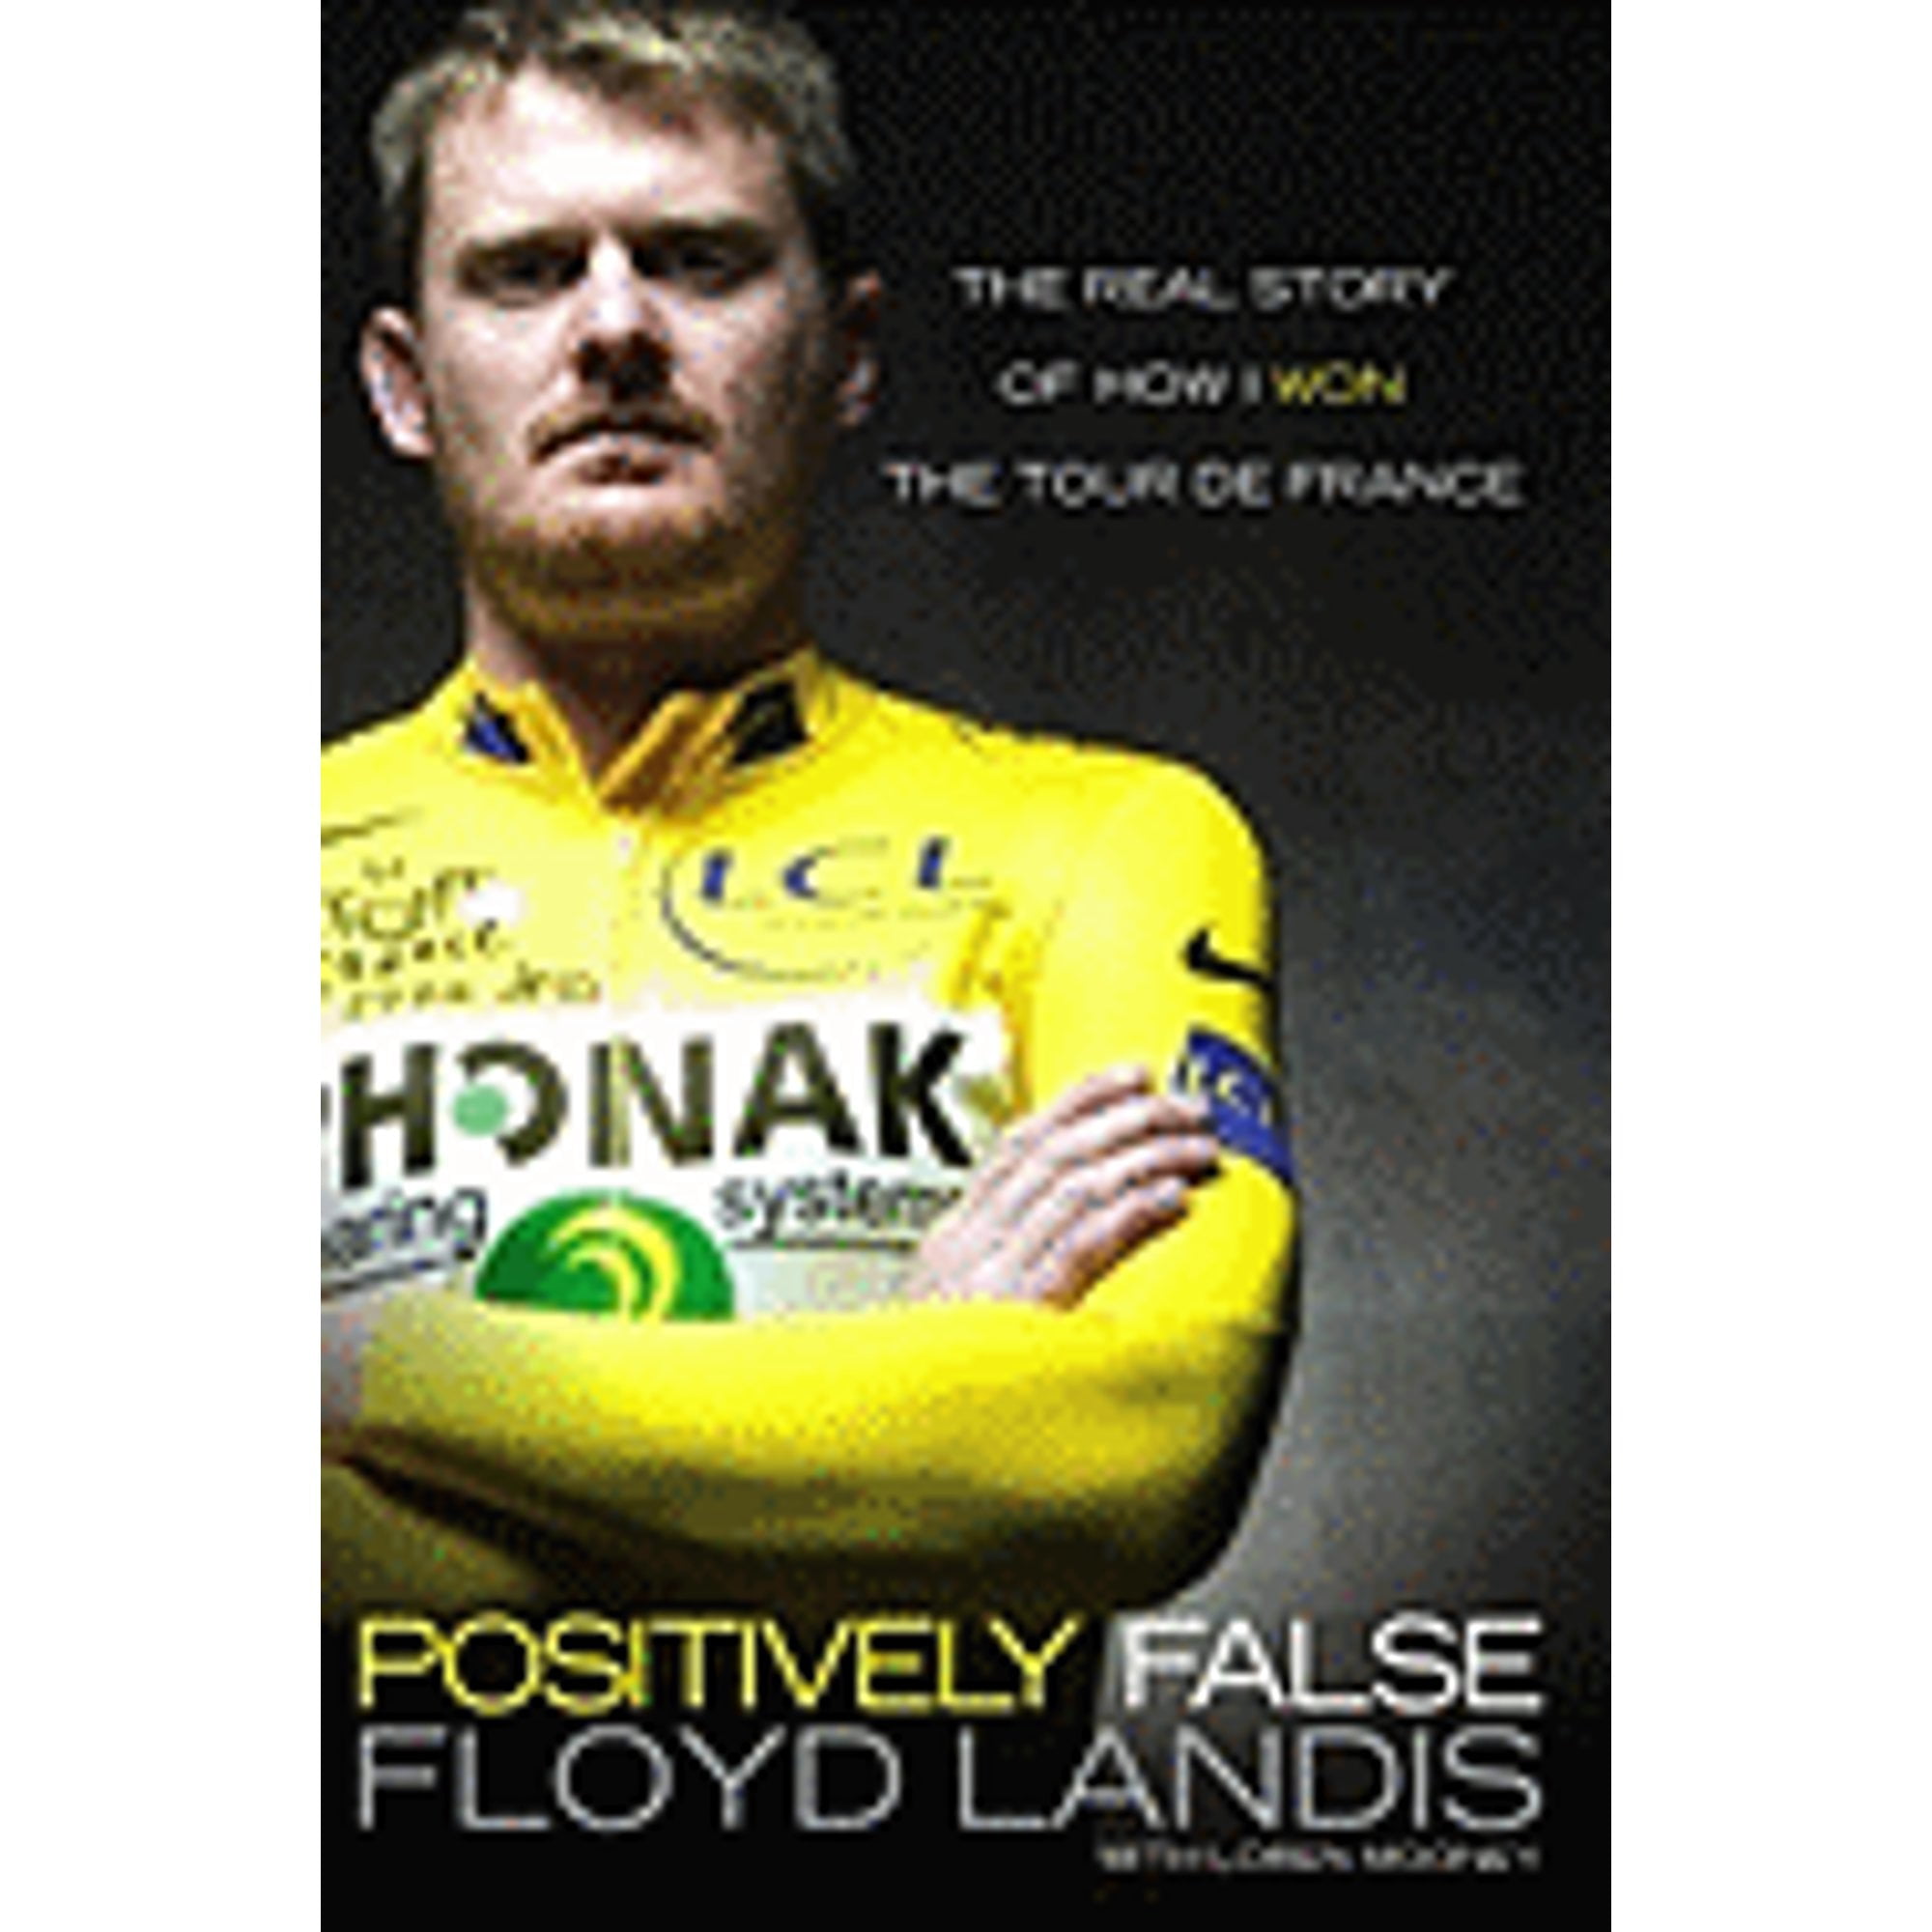 Positively False: The Real Story of How I Won the Tour de France (Pre-Owned  Hardcover 9781416950233) by Floyd Landis, Loren Mooney - Walmart.com